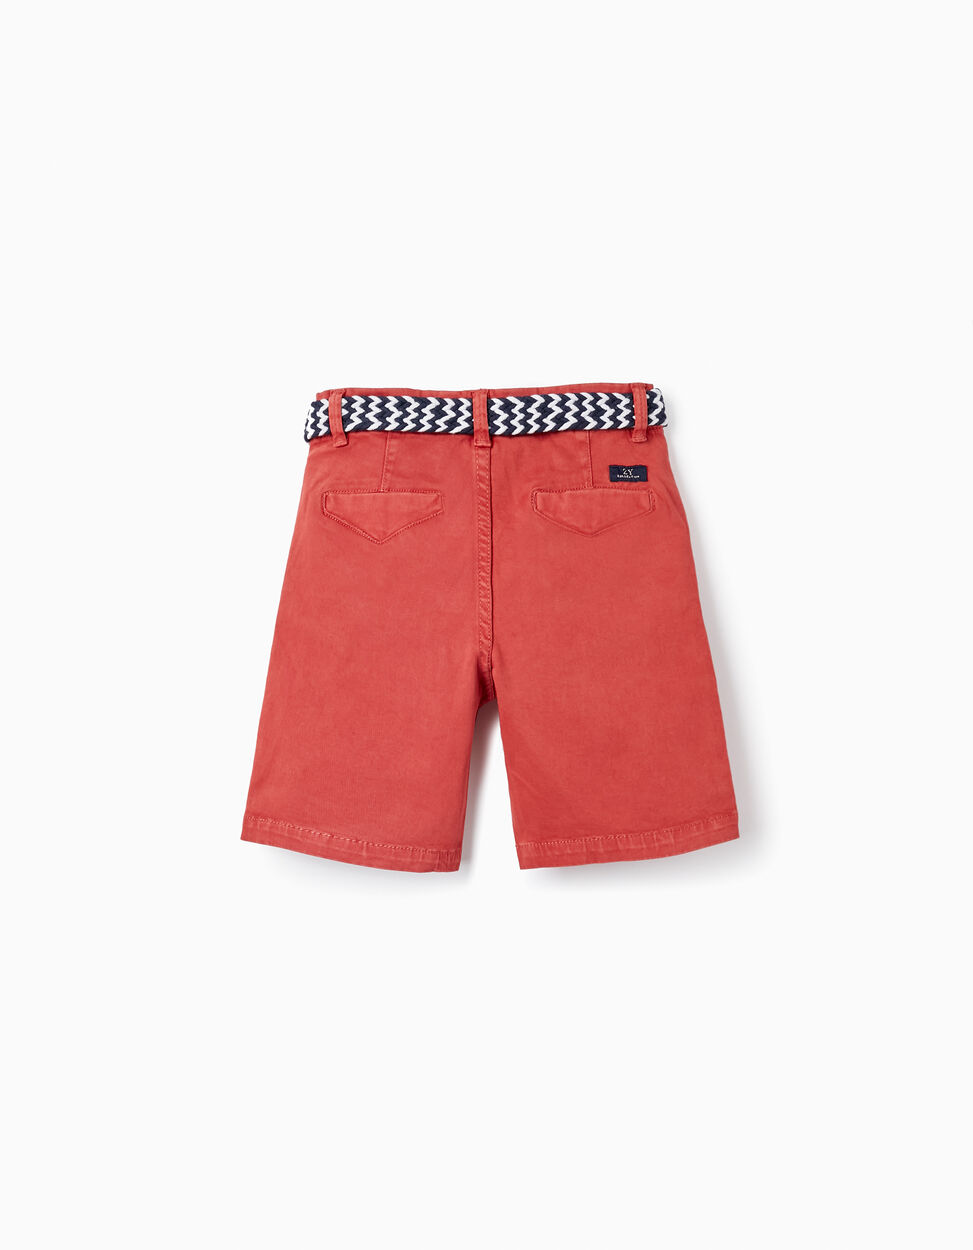 Buy Online Shorts with Belt for Boys 'Midi', Red